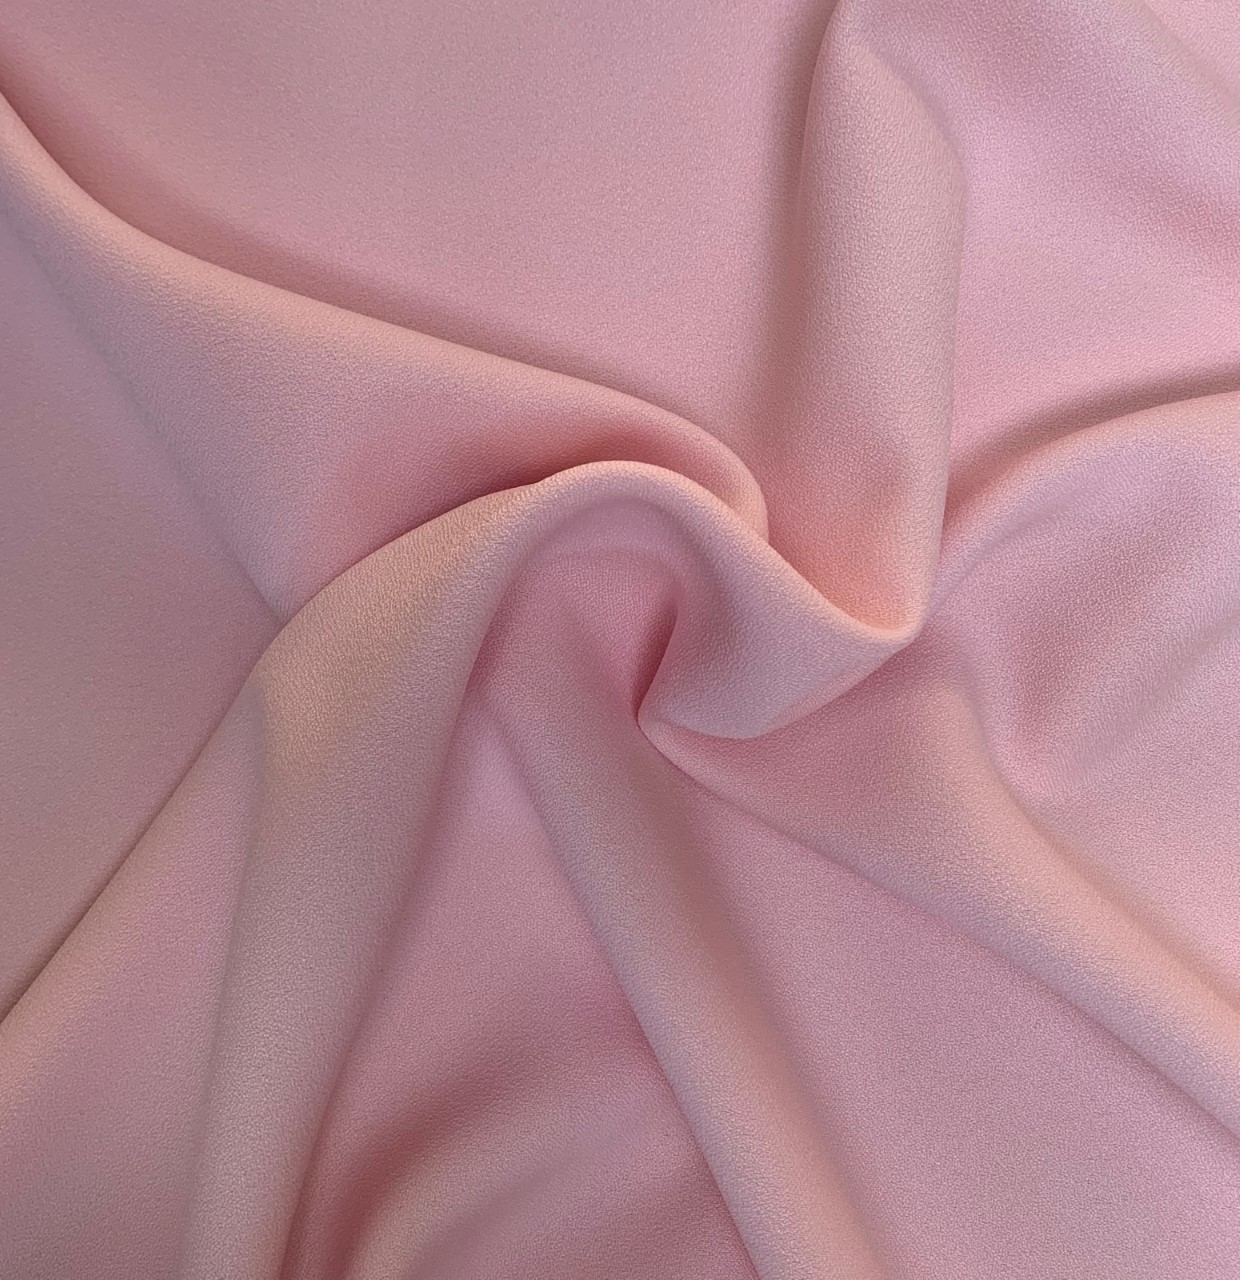 Pink Crepe Fabric - 60" By the yard (100% Polyester) - Click Image to Close